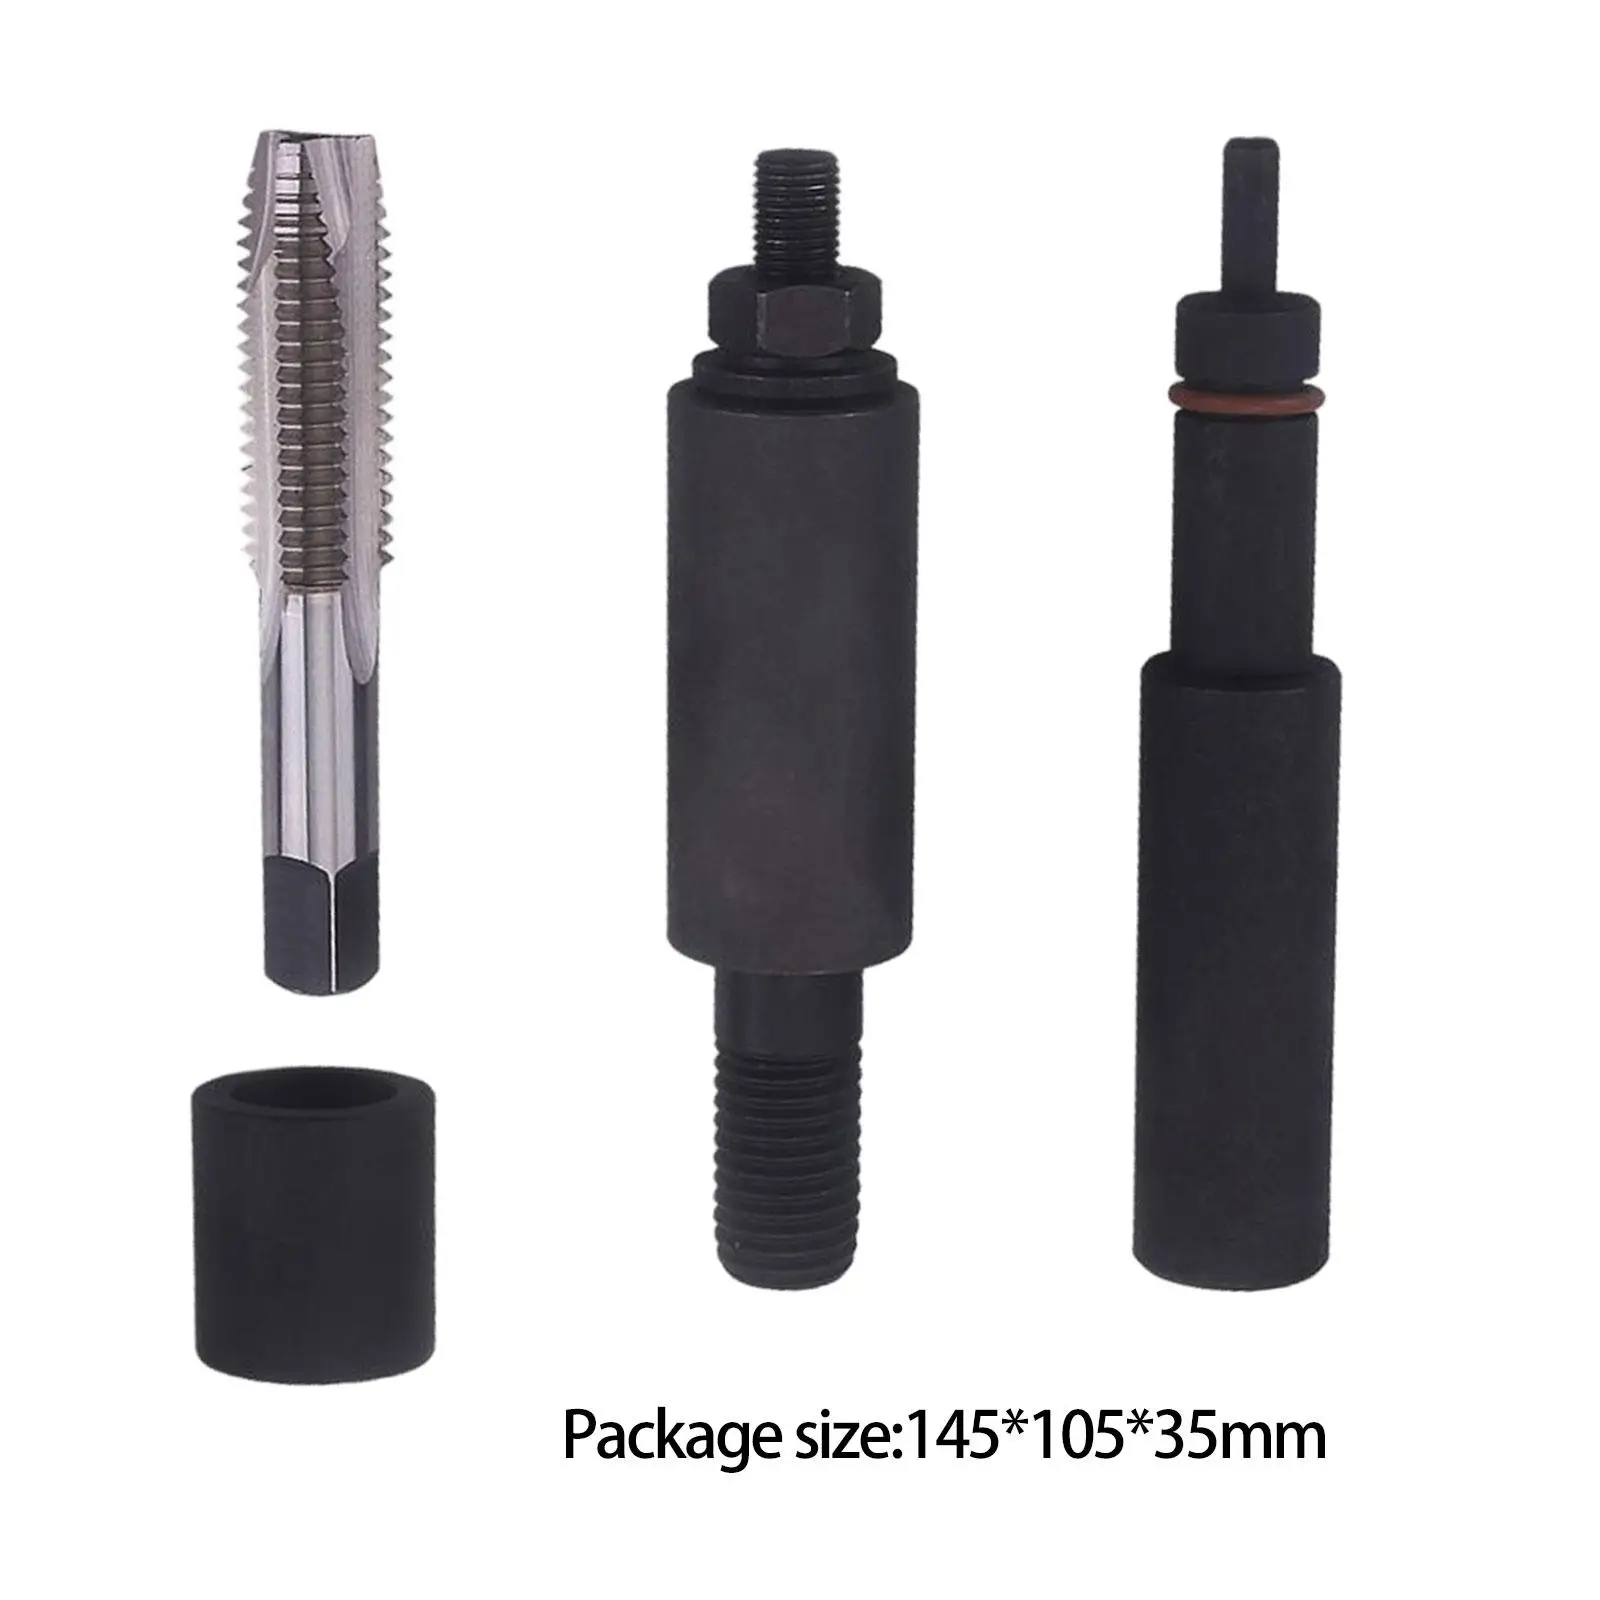 Fuel Injector Sleeve Cup Remover Installer Kit High Performance Car Repair Tool for Ford 6.0L 6.4L Powerstroke Engines